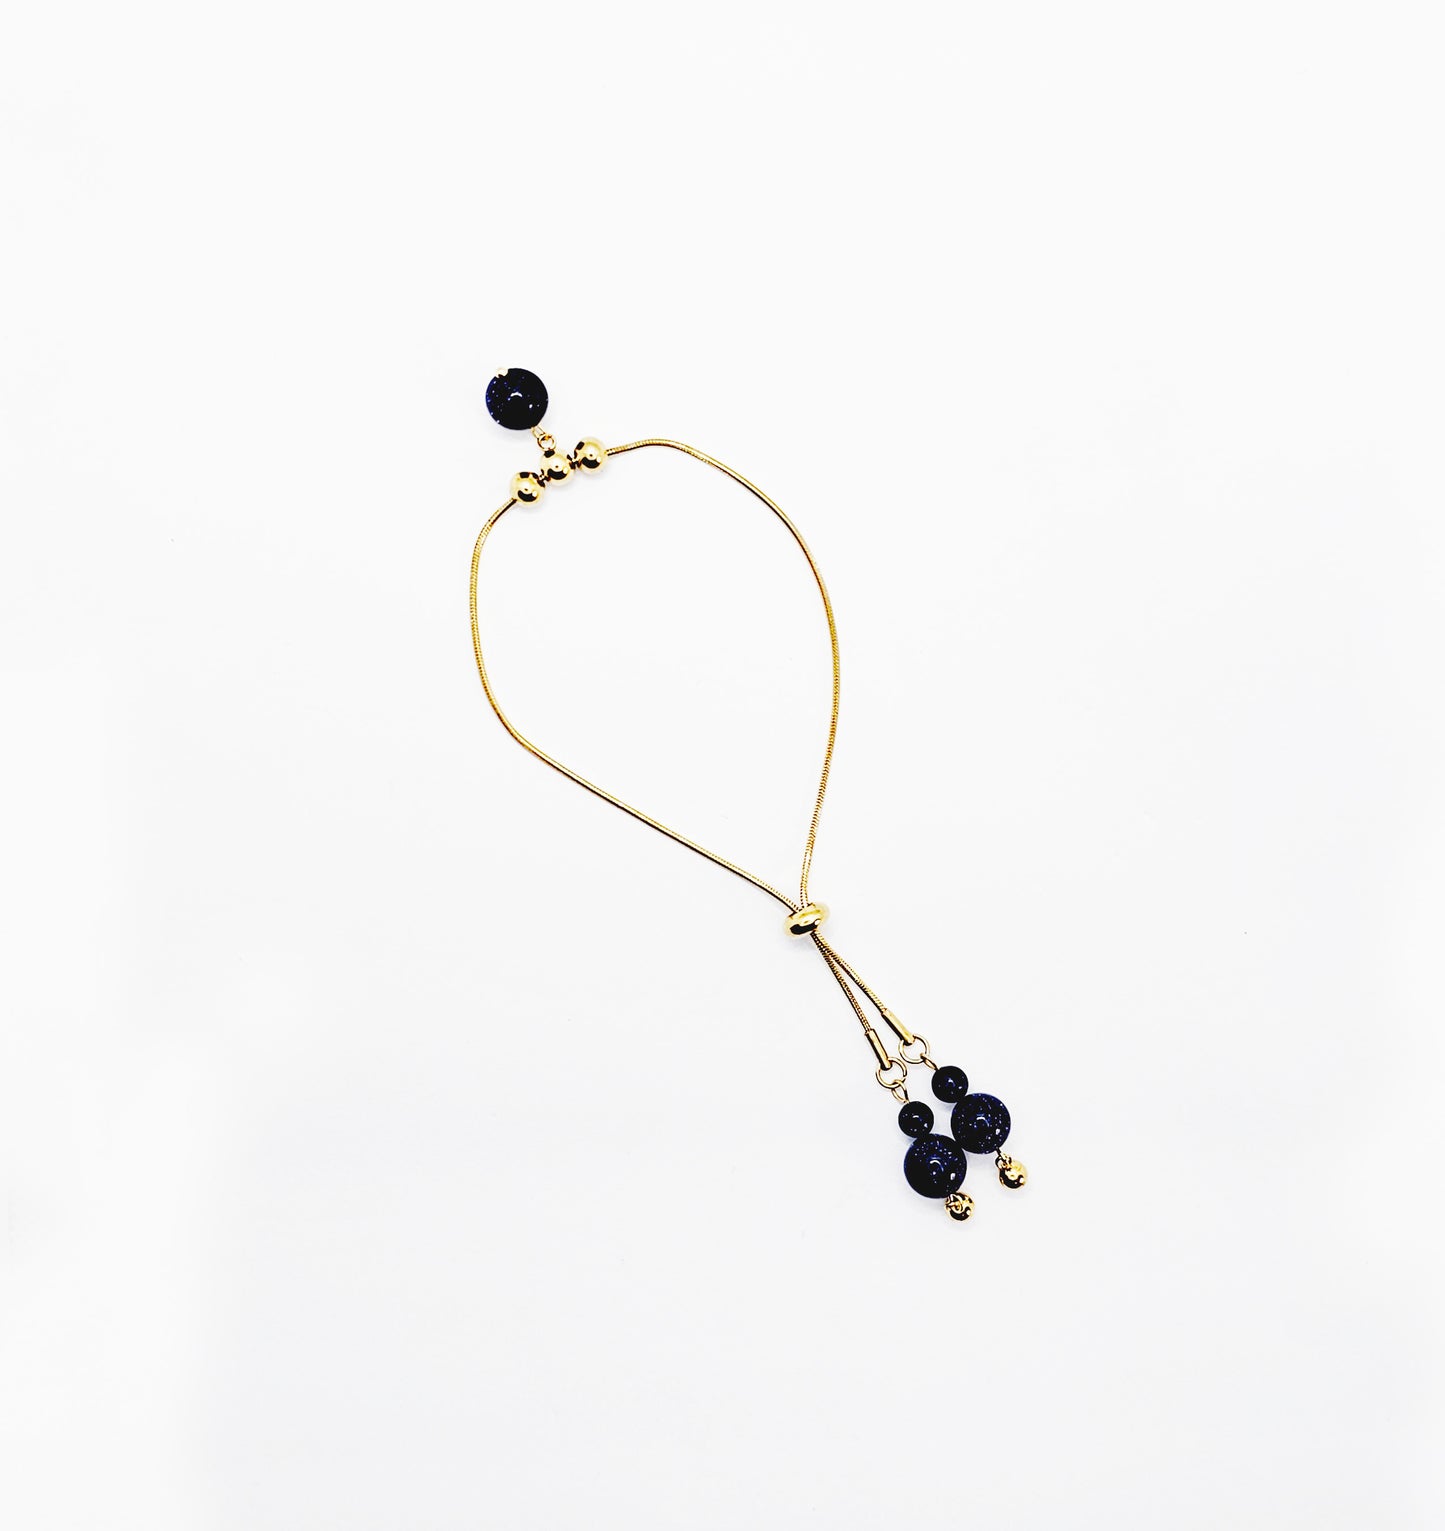 Penis Noose Bracelet with Dazzling Blue Goldstone Beads. Gold Stainless Steel Penis Lasso, Cock Ring Jewelry